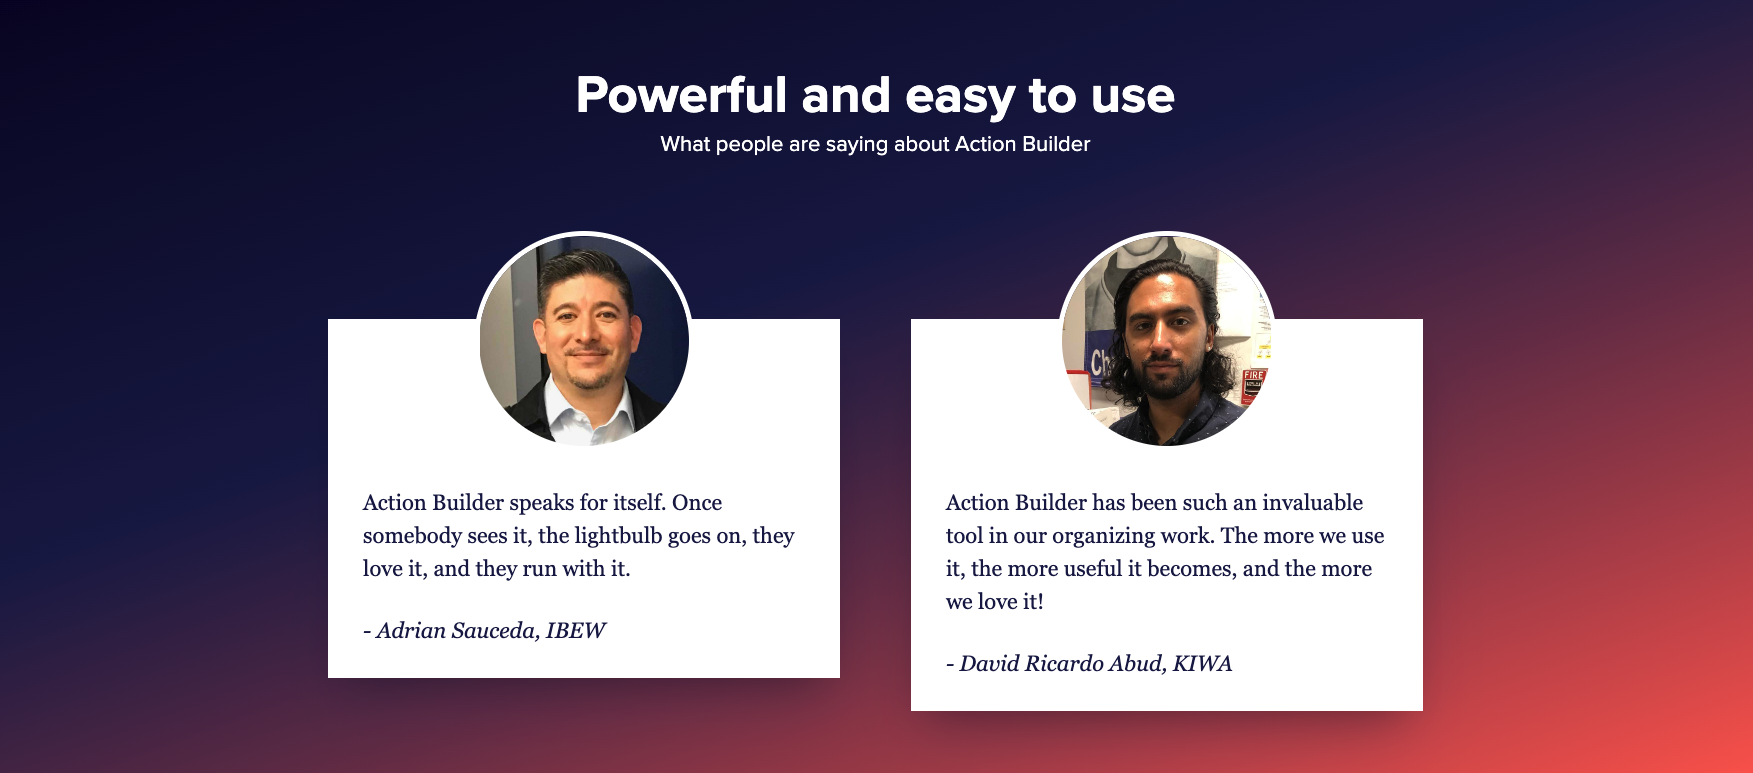 A graphic that reads:

"Powerful and easy to use. What people are saying about Action Builder."

It includes two testimonials. The first testimonial reads, "Action Builder speaks for itself. Once somebody sees it, the lightbulb goes on, they love it, and they run with it." — Adrian Sauceda, IBEW

The second testimonial reads: "Action Builder has been such an invaluable tool in our organizing work. The more we use it, the more useful it becomes, and the more we love it!" — David Ricardo Abud, KIWA